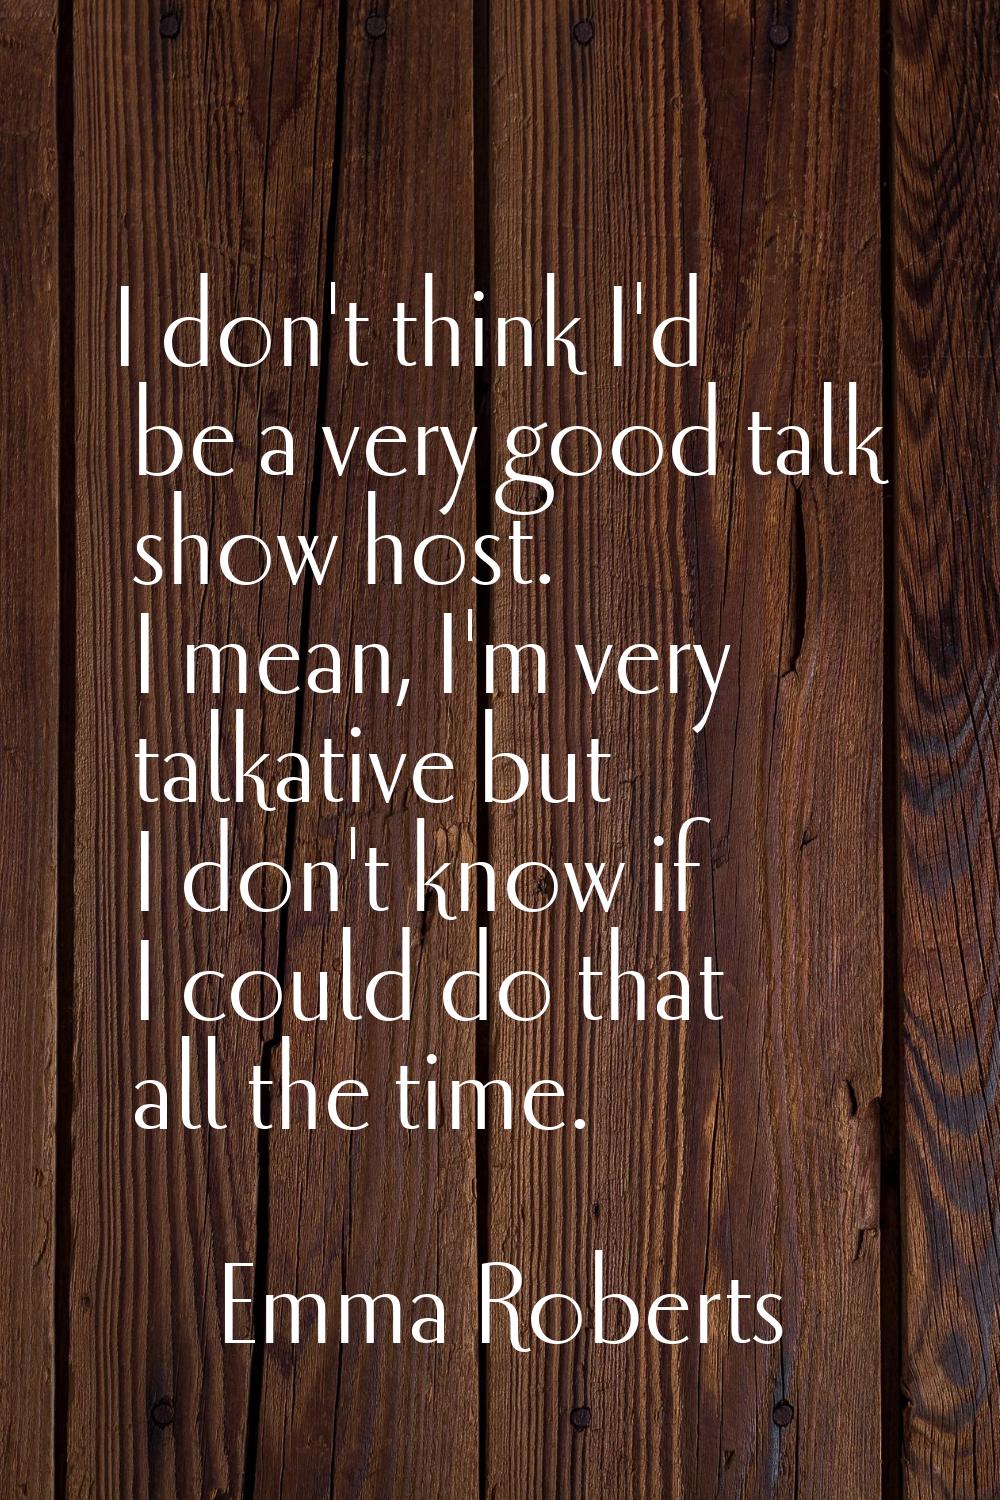 I don't think I'd be a very good talk show host. I mean, I'm very talkative but I don't know if I c